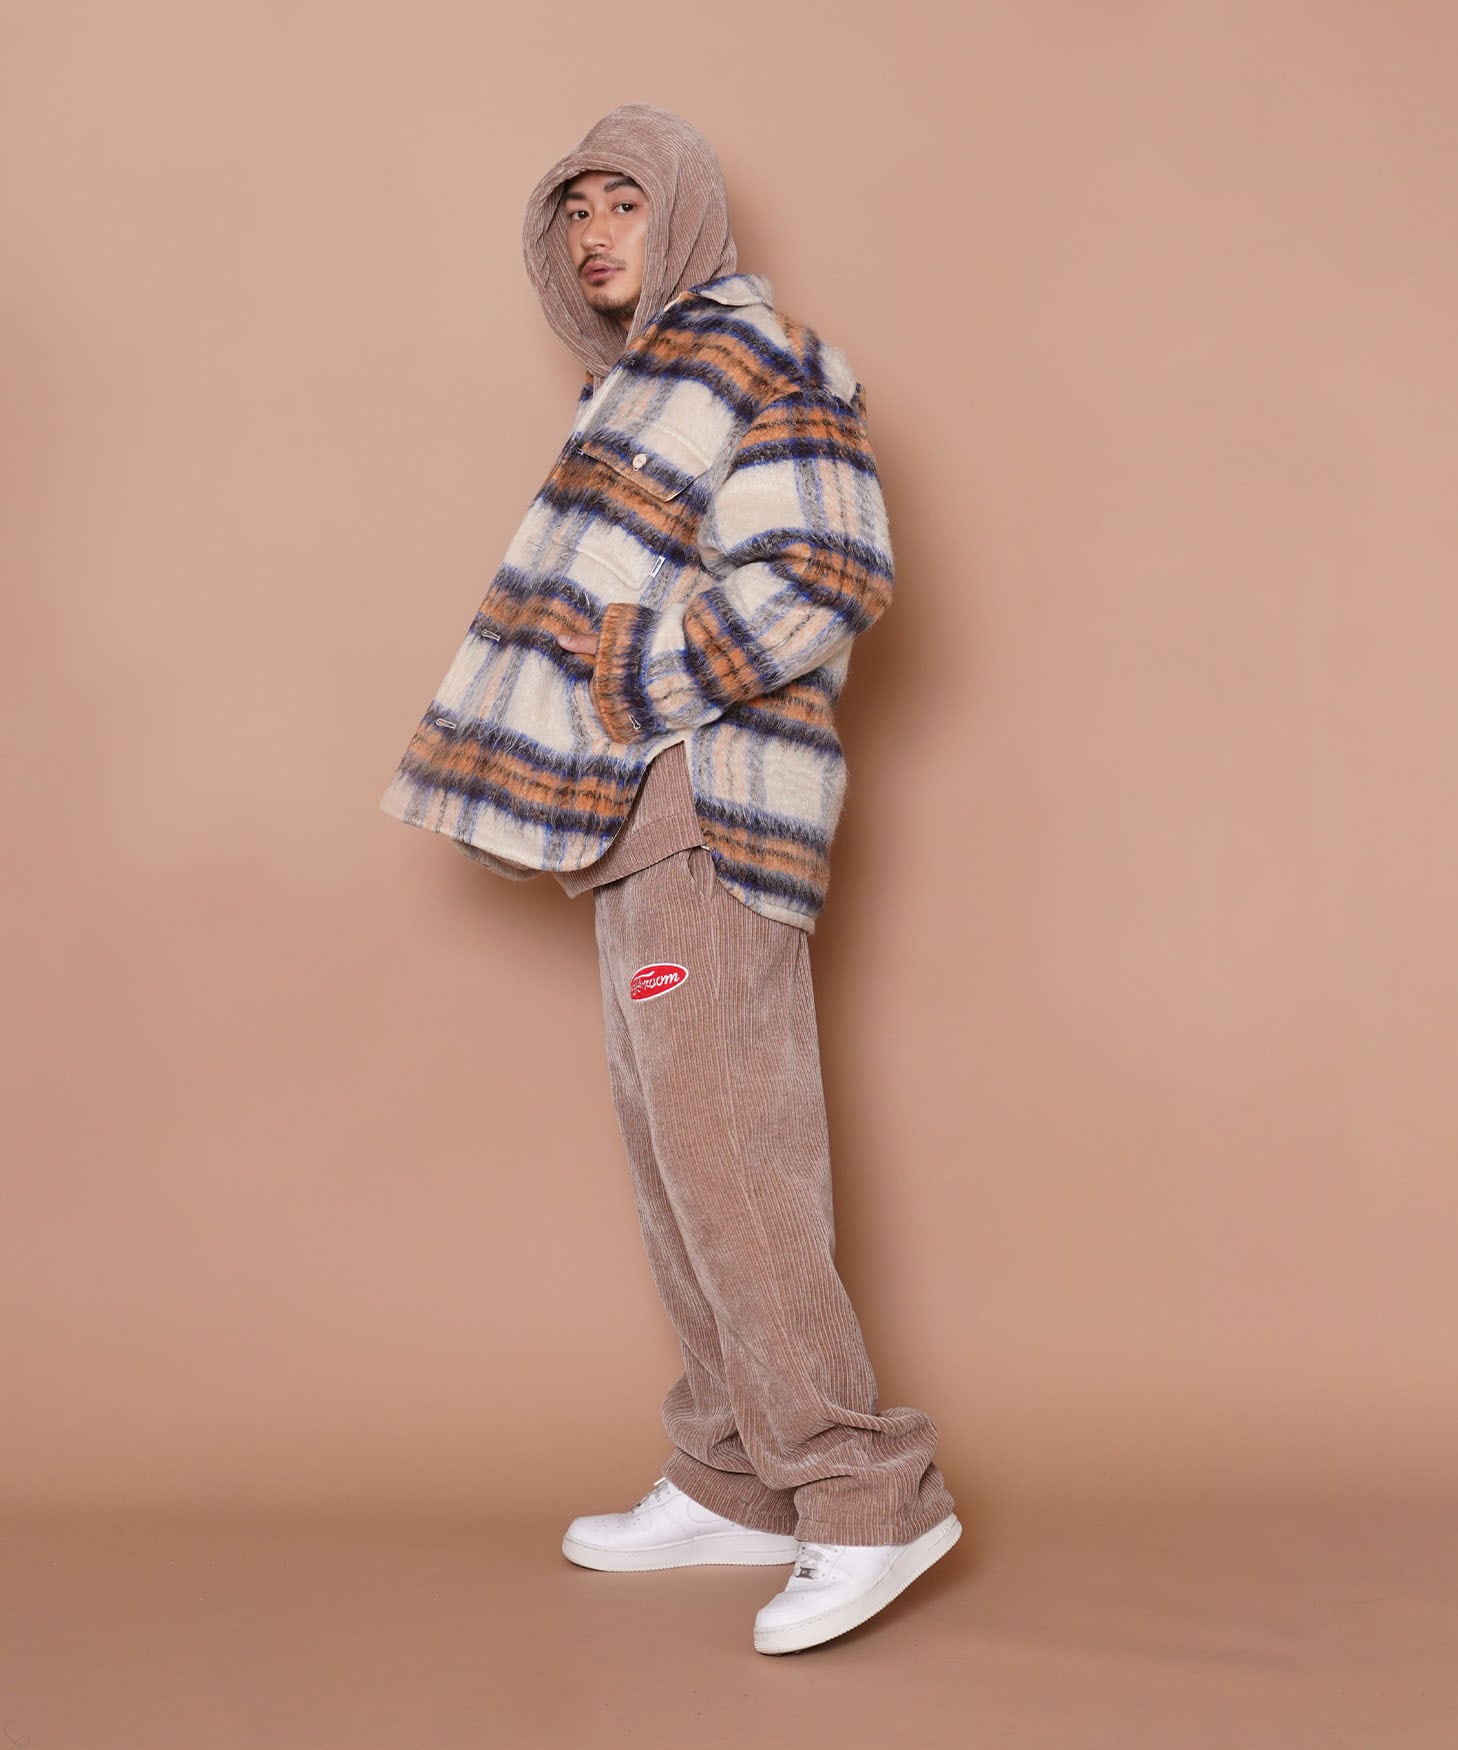 Re:roomWIDE PITCH CORDUROY BIG PARKA［REC］   #Re:room